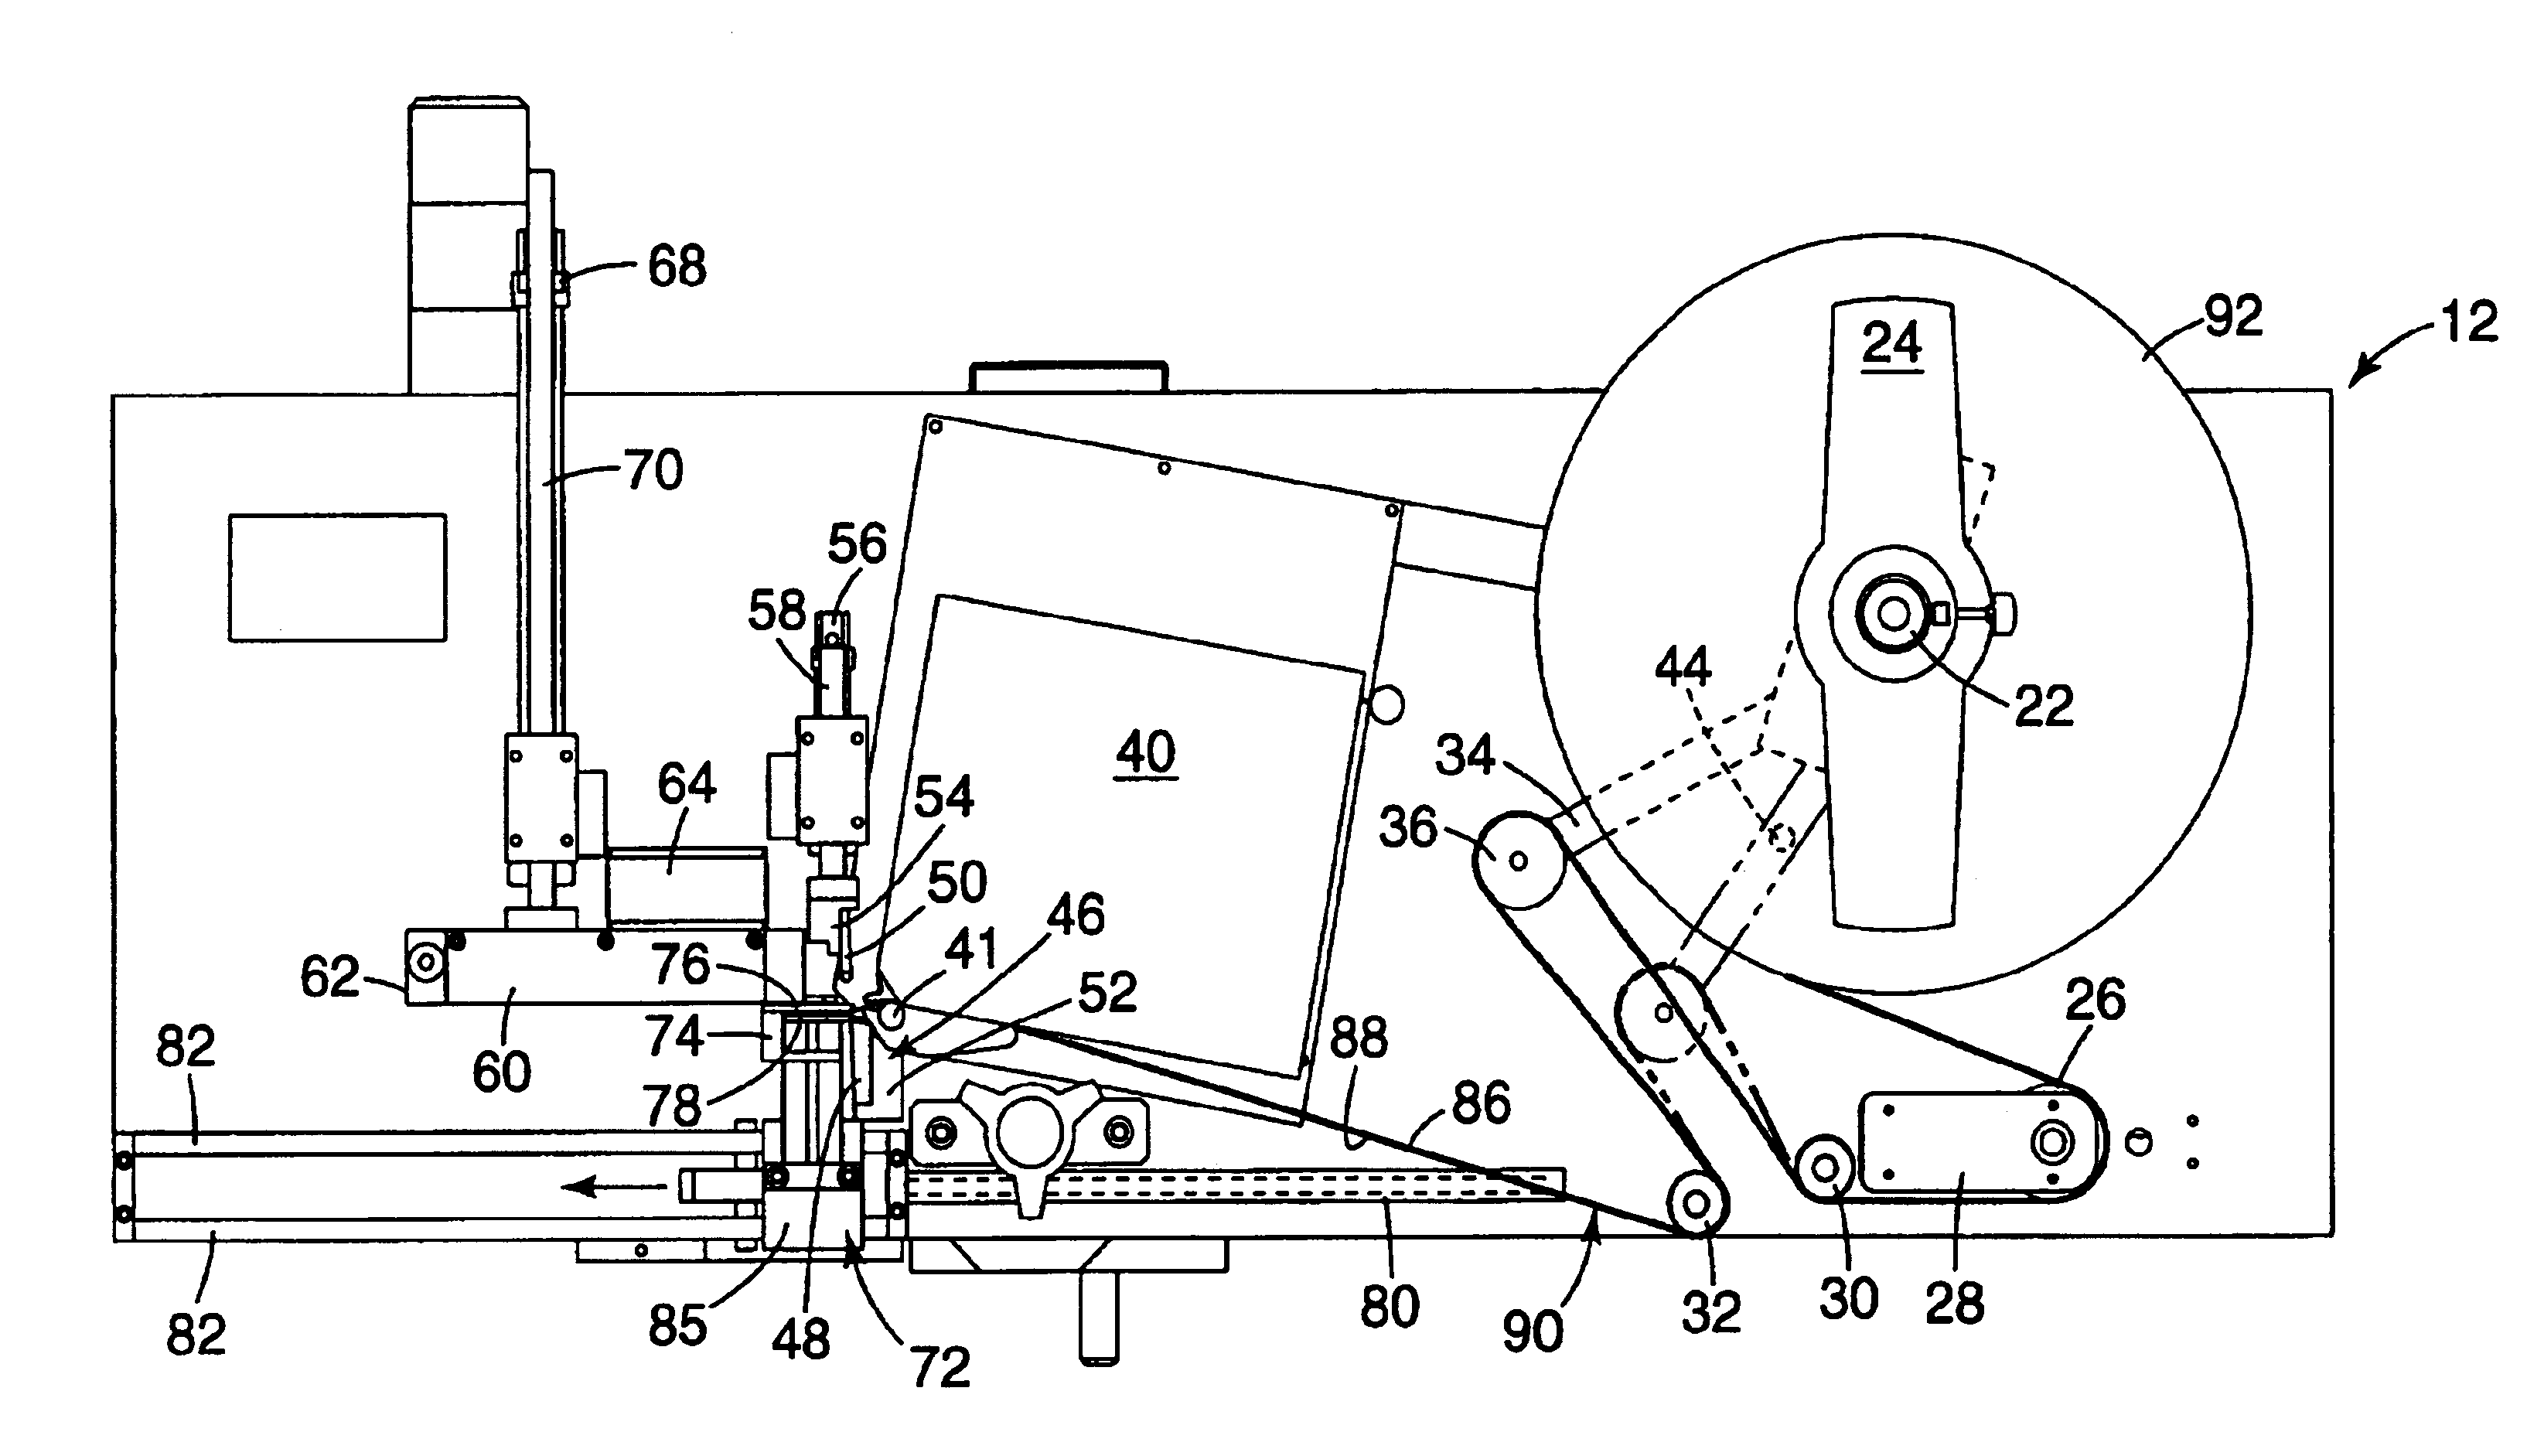 Apparatus for printing and applying tape and methods of printing and applying tape